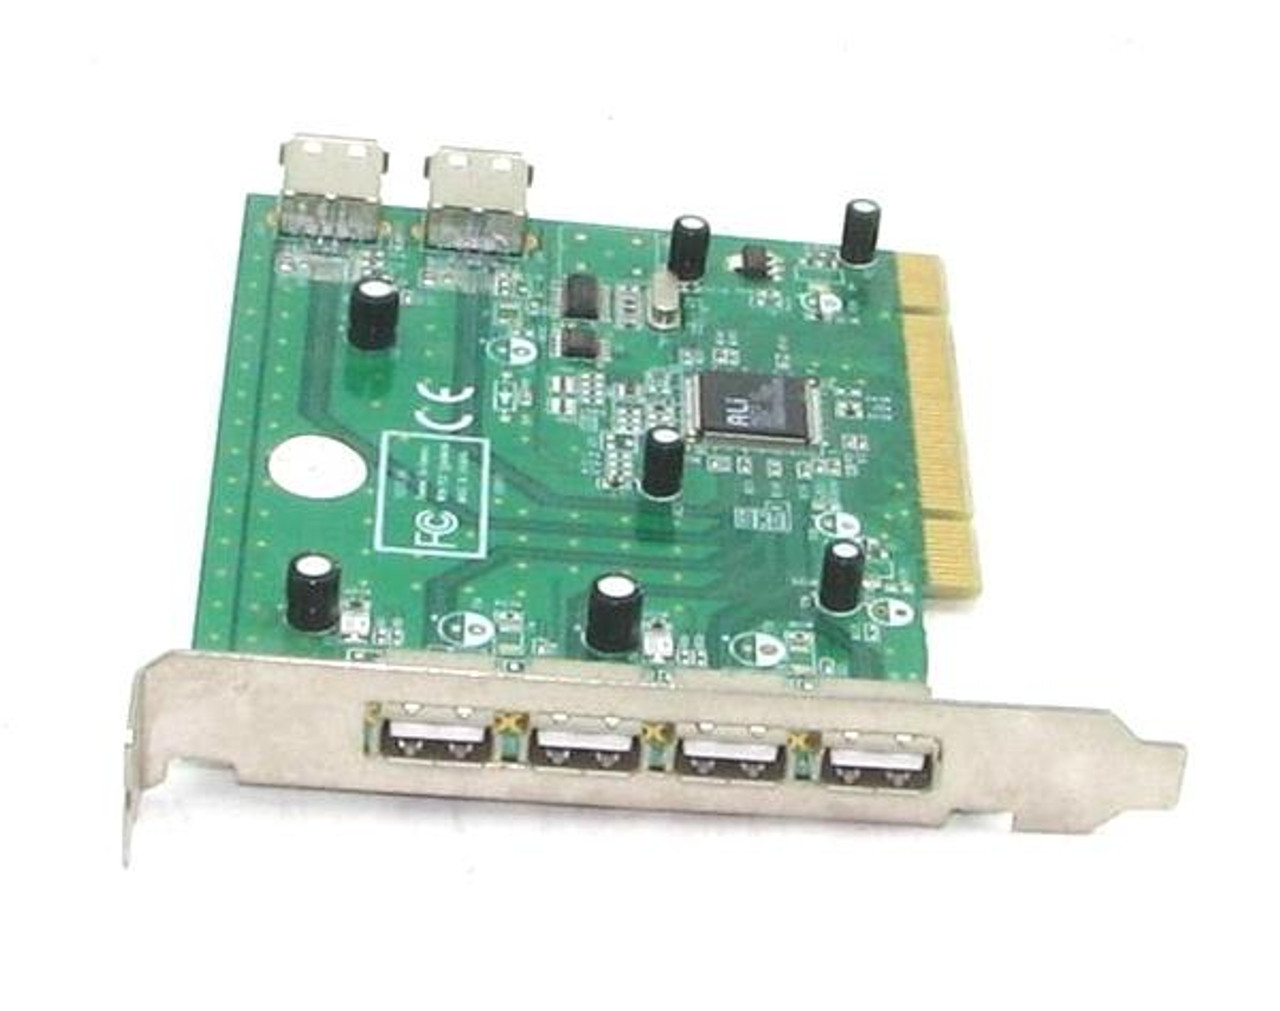 PCI625USB21 StarTech 6-Ports PCI USB 2.0 Card for PC and Mac